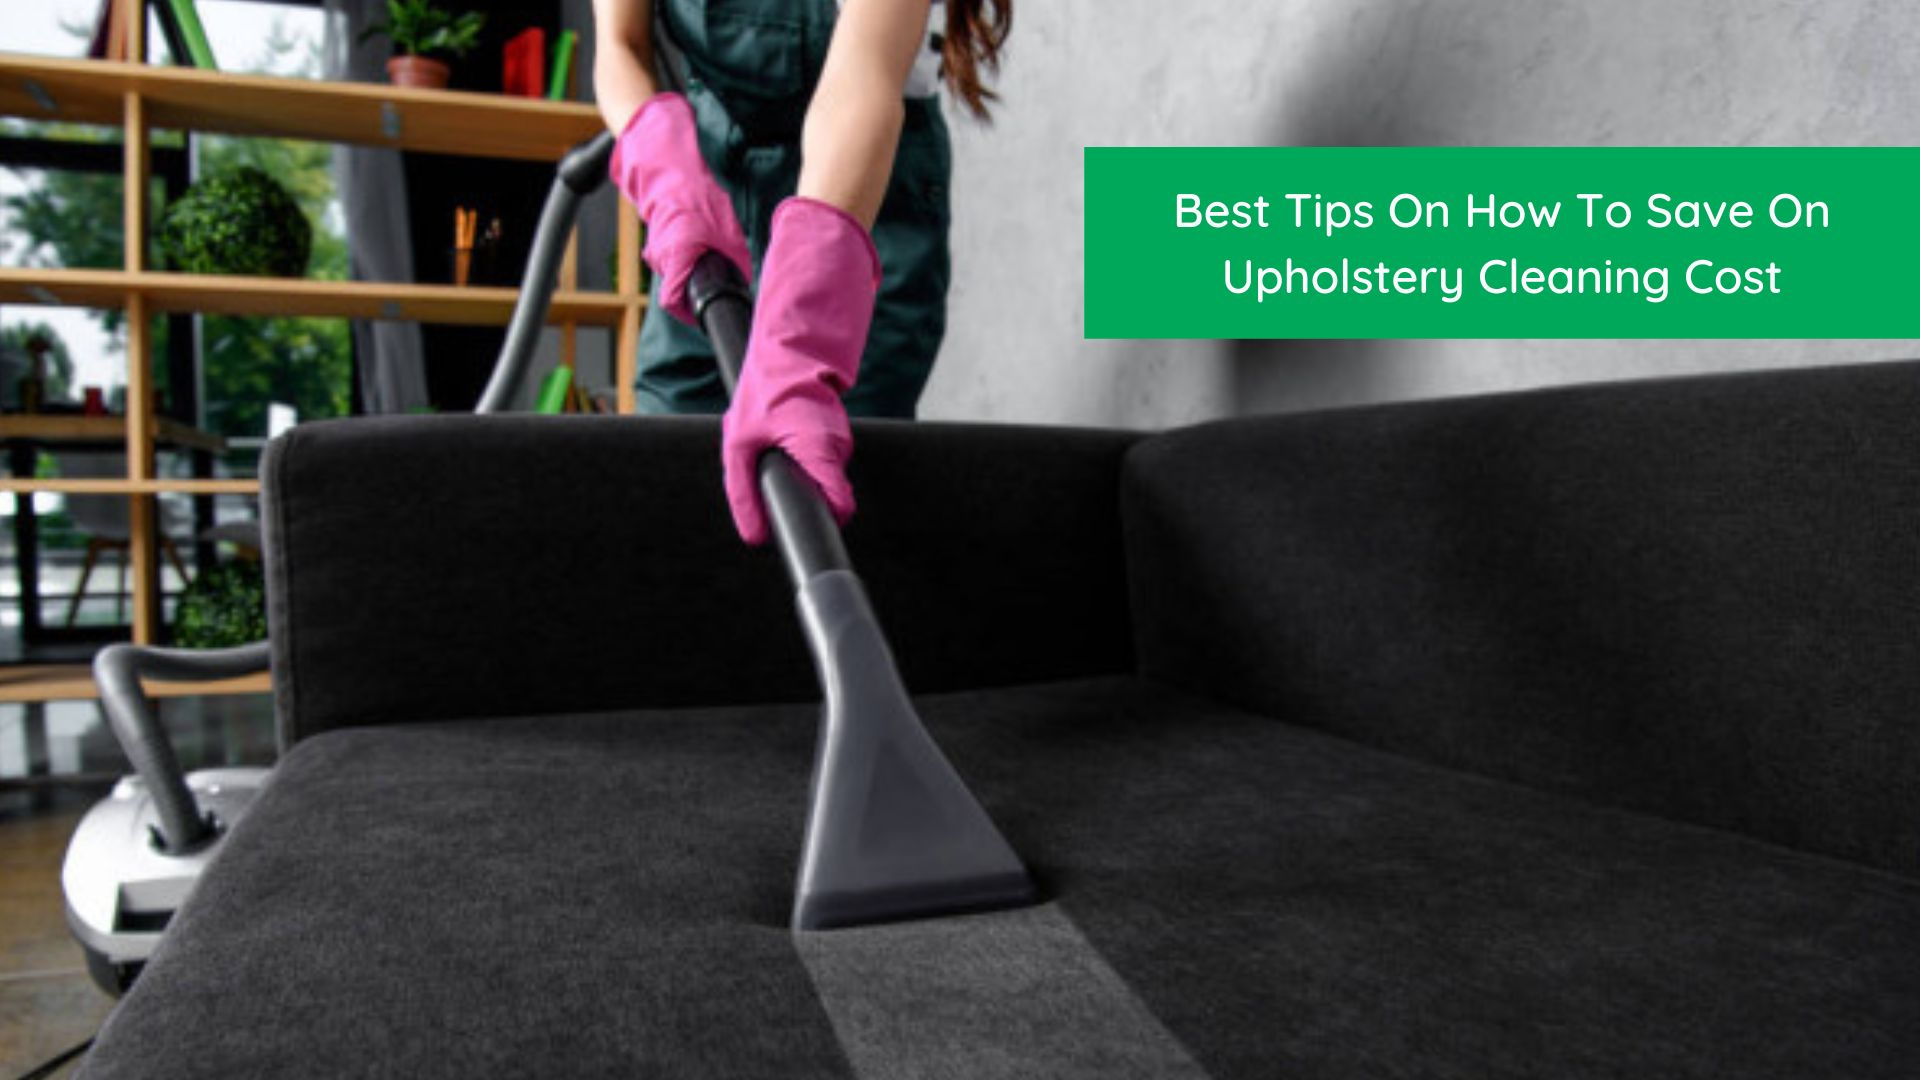 The Best Upholstery Cleaners in 2022